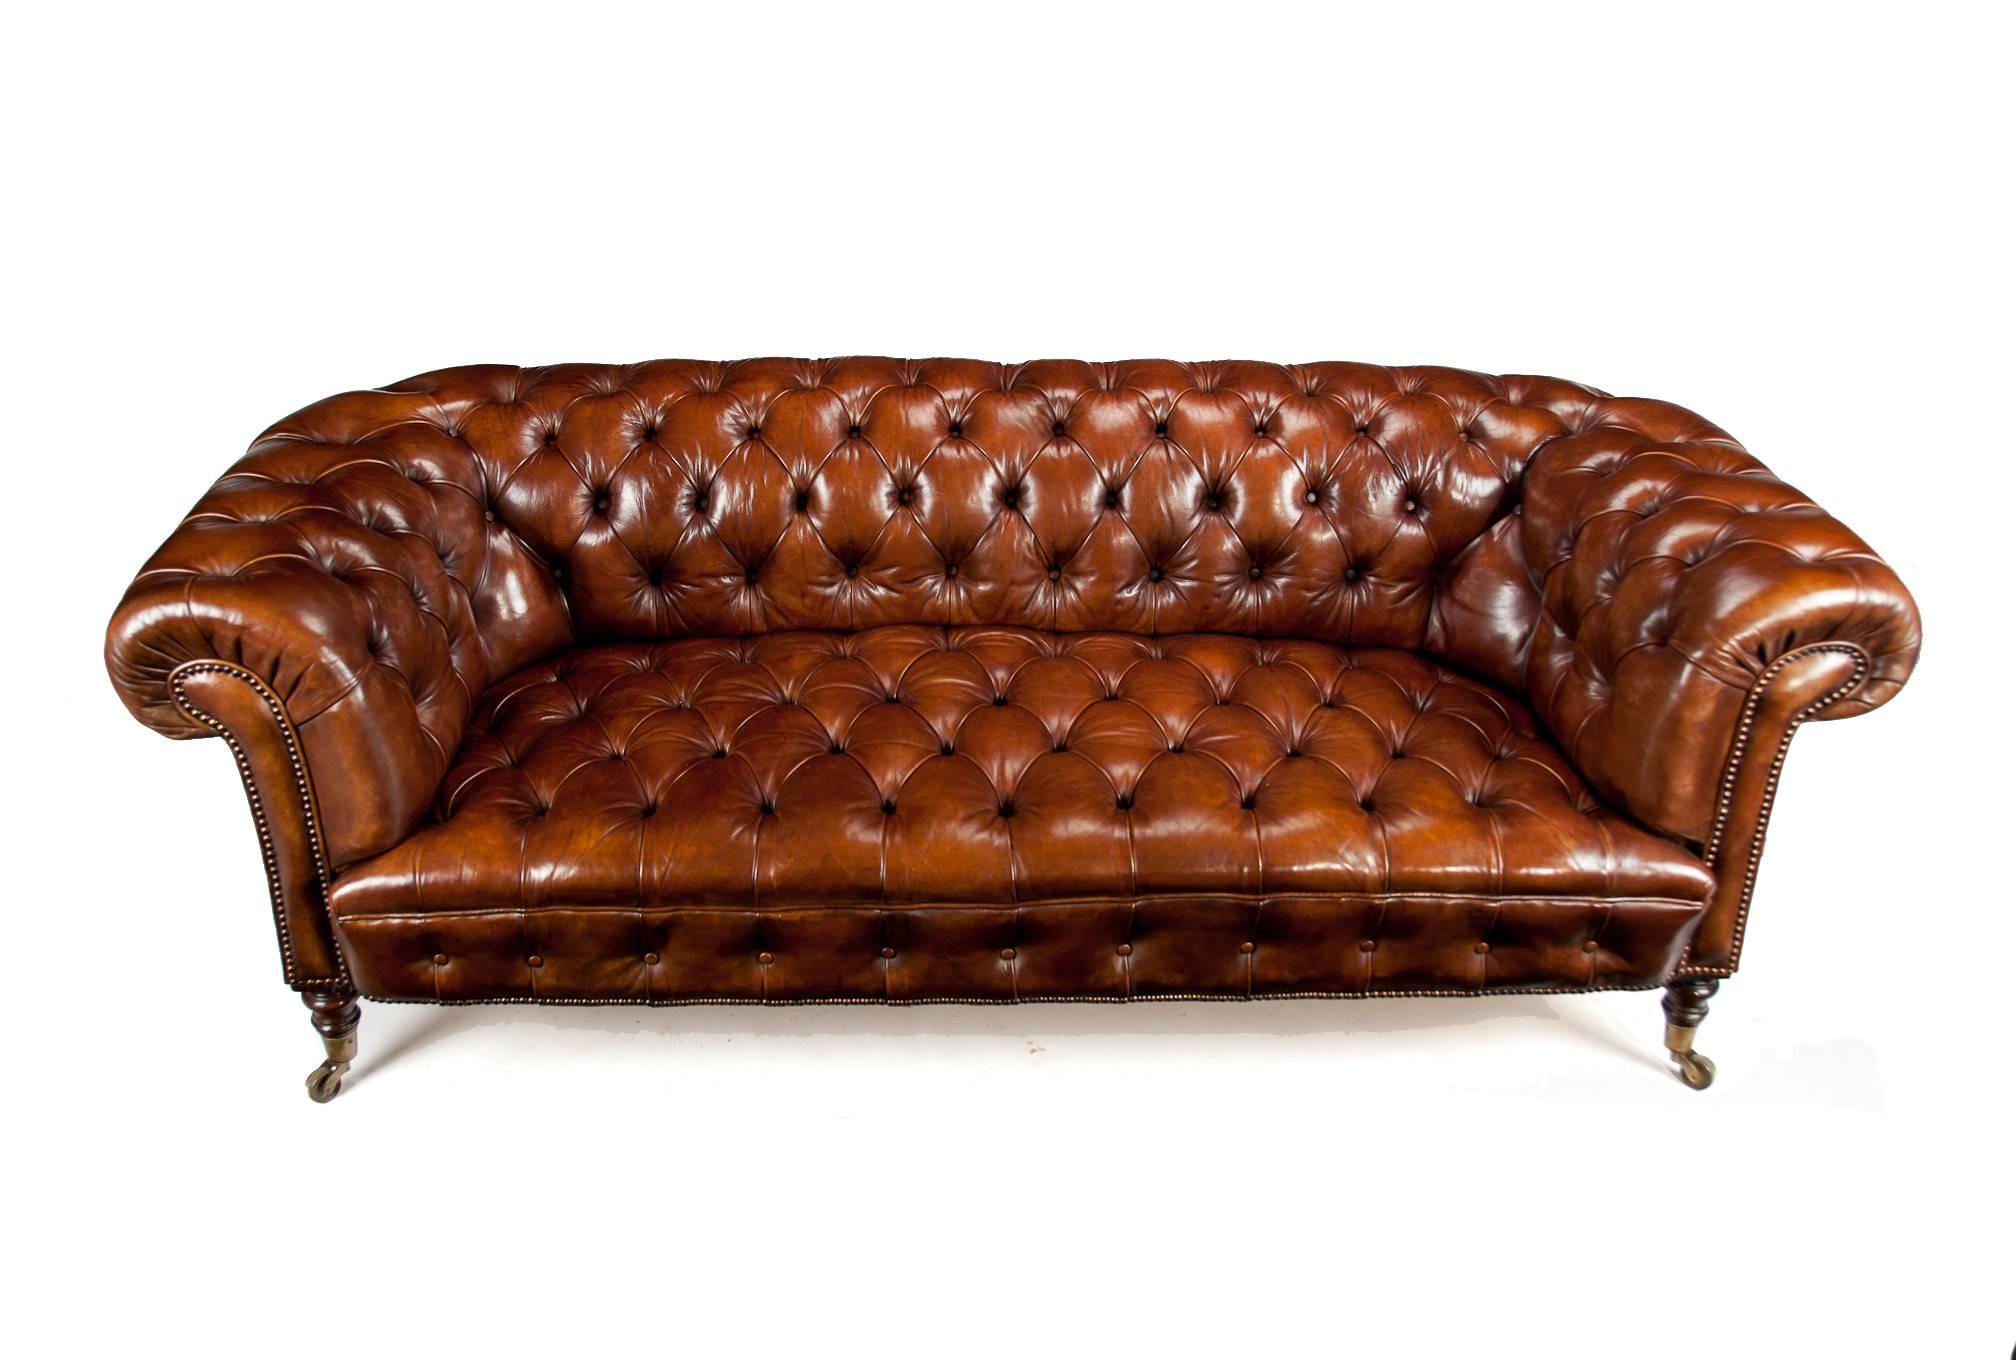 Fine Antique 19th Century Leather Upholstered Chesterfield 3